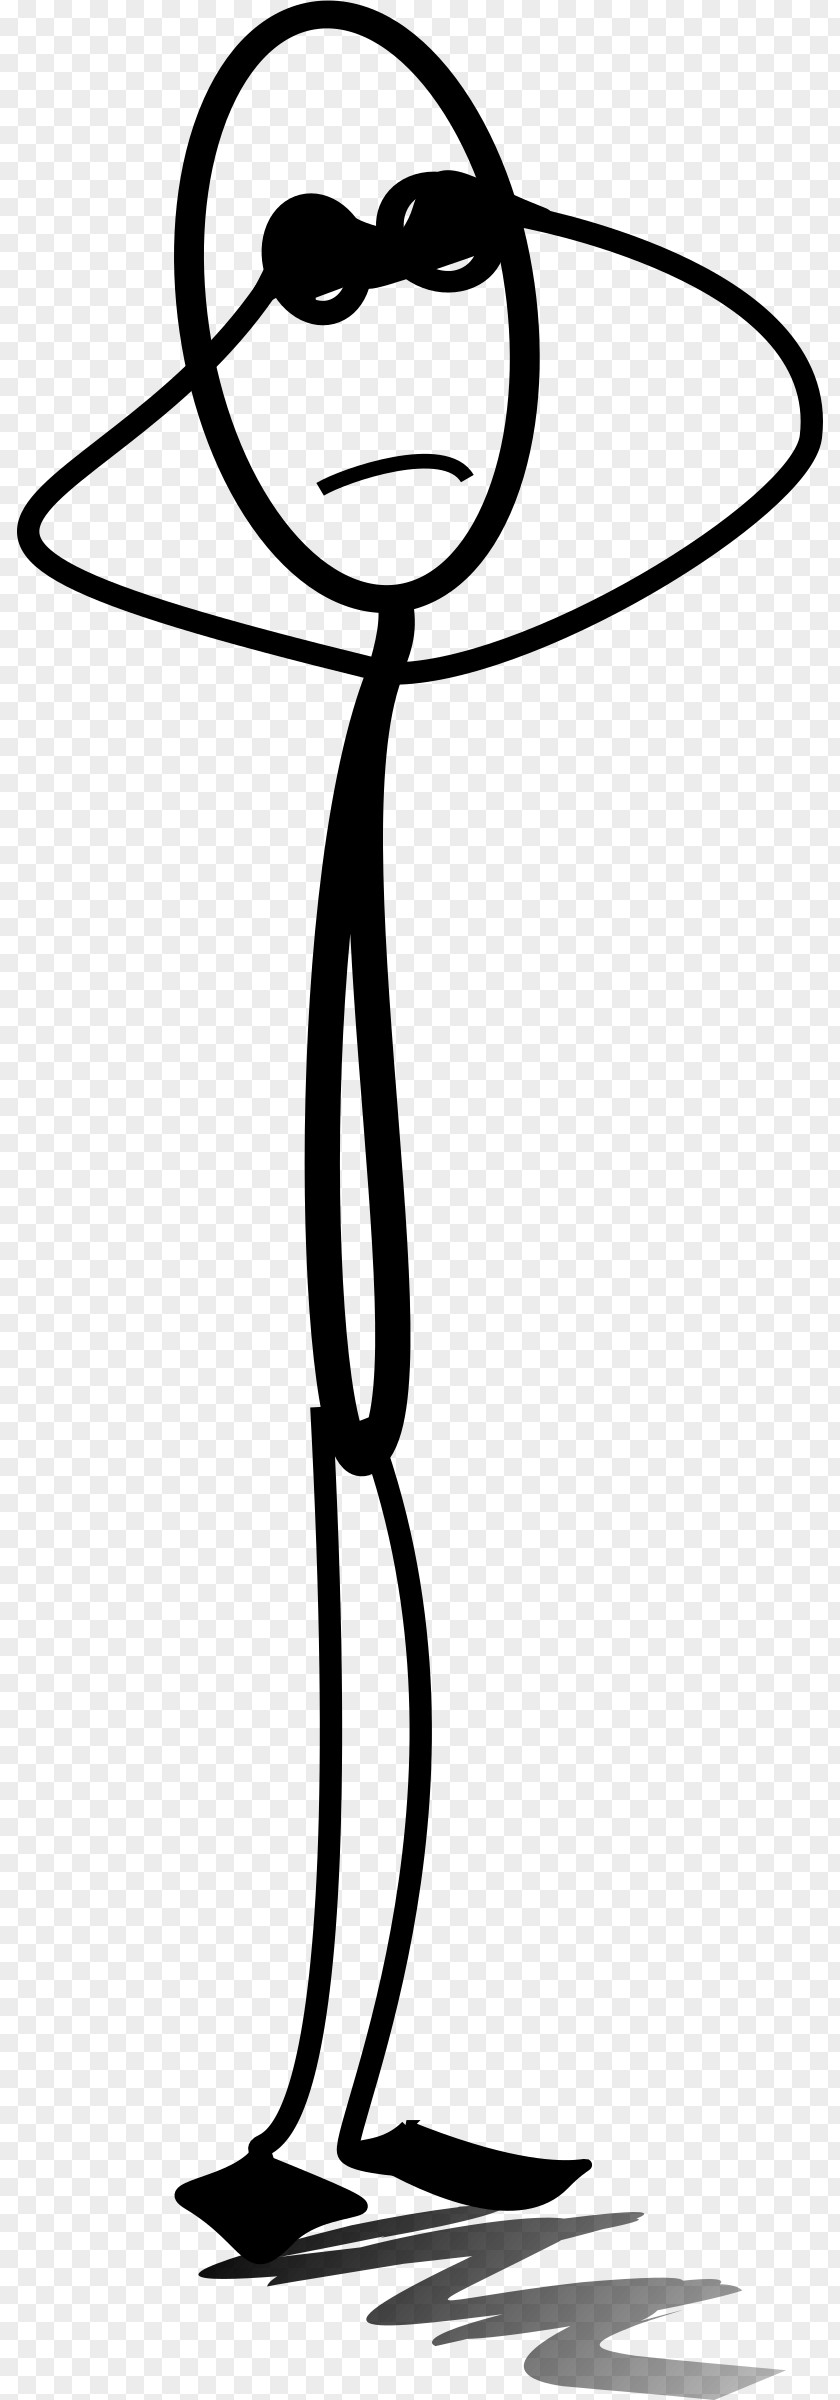 Justice Stick Figure Drawing Clip Art PNG